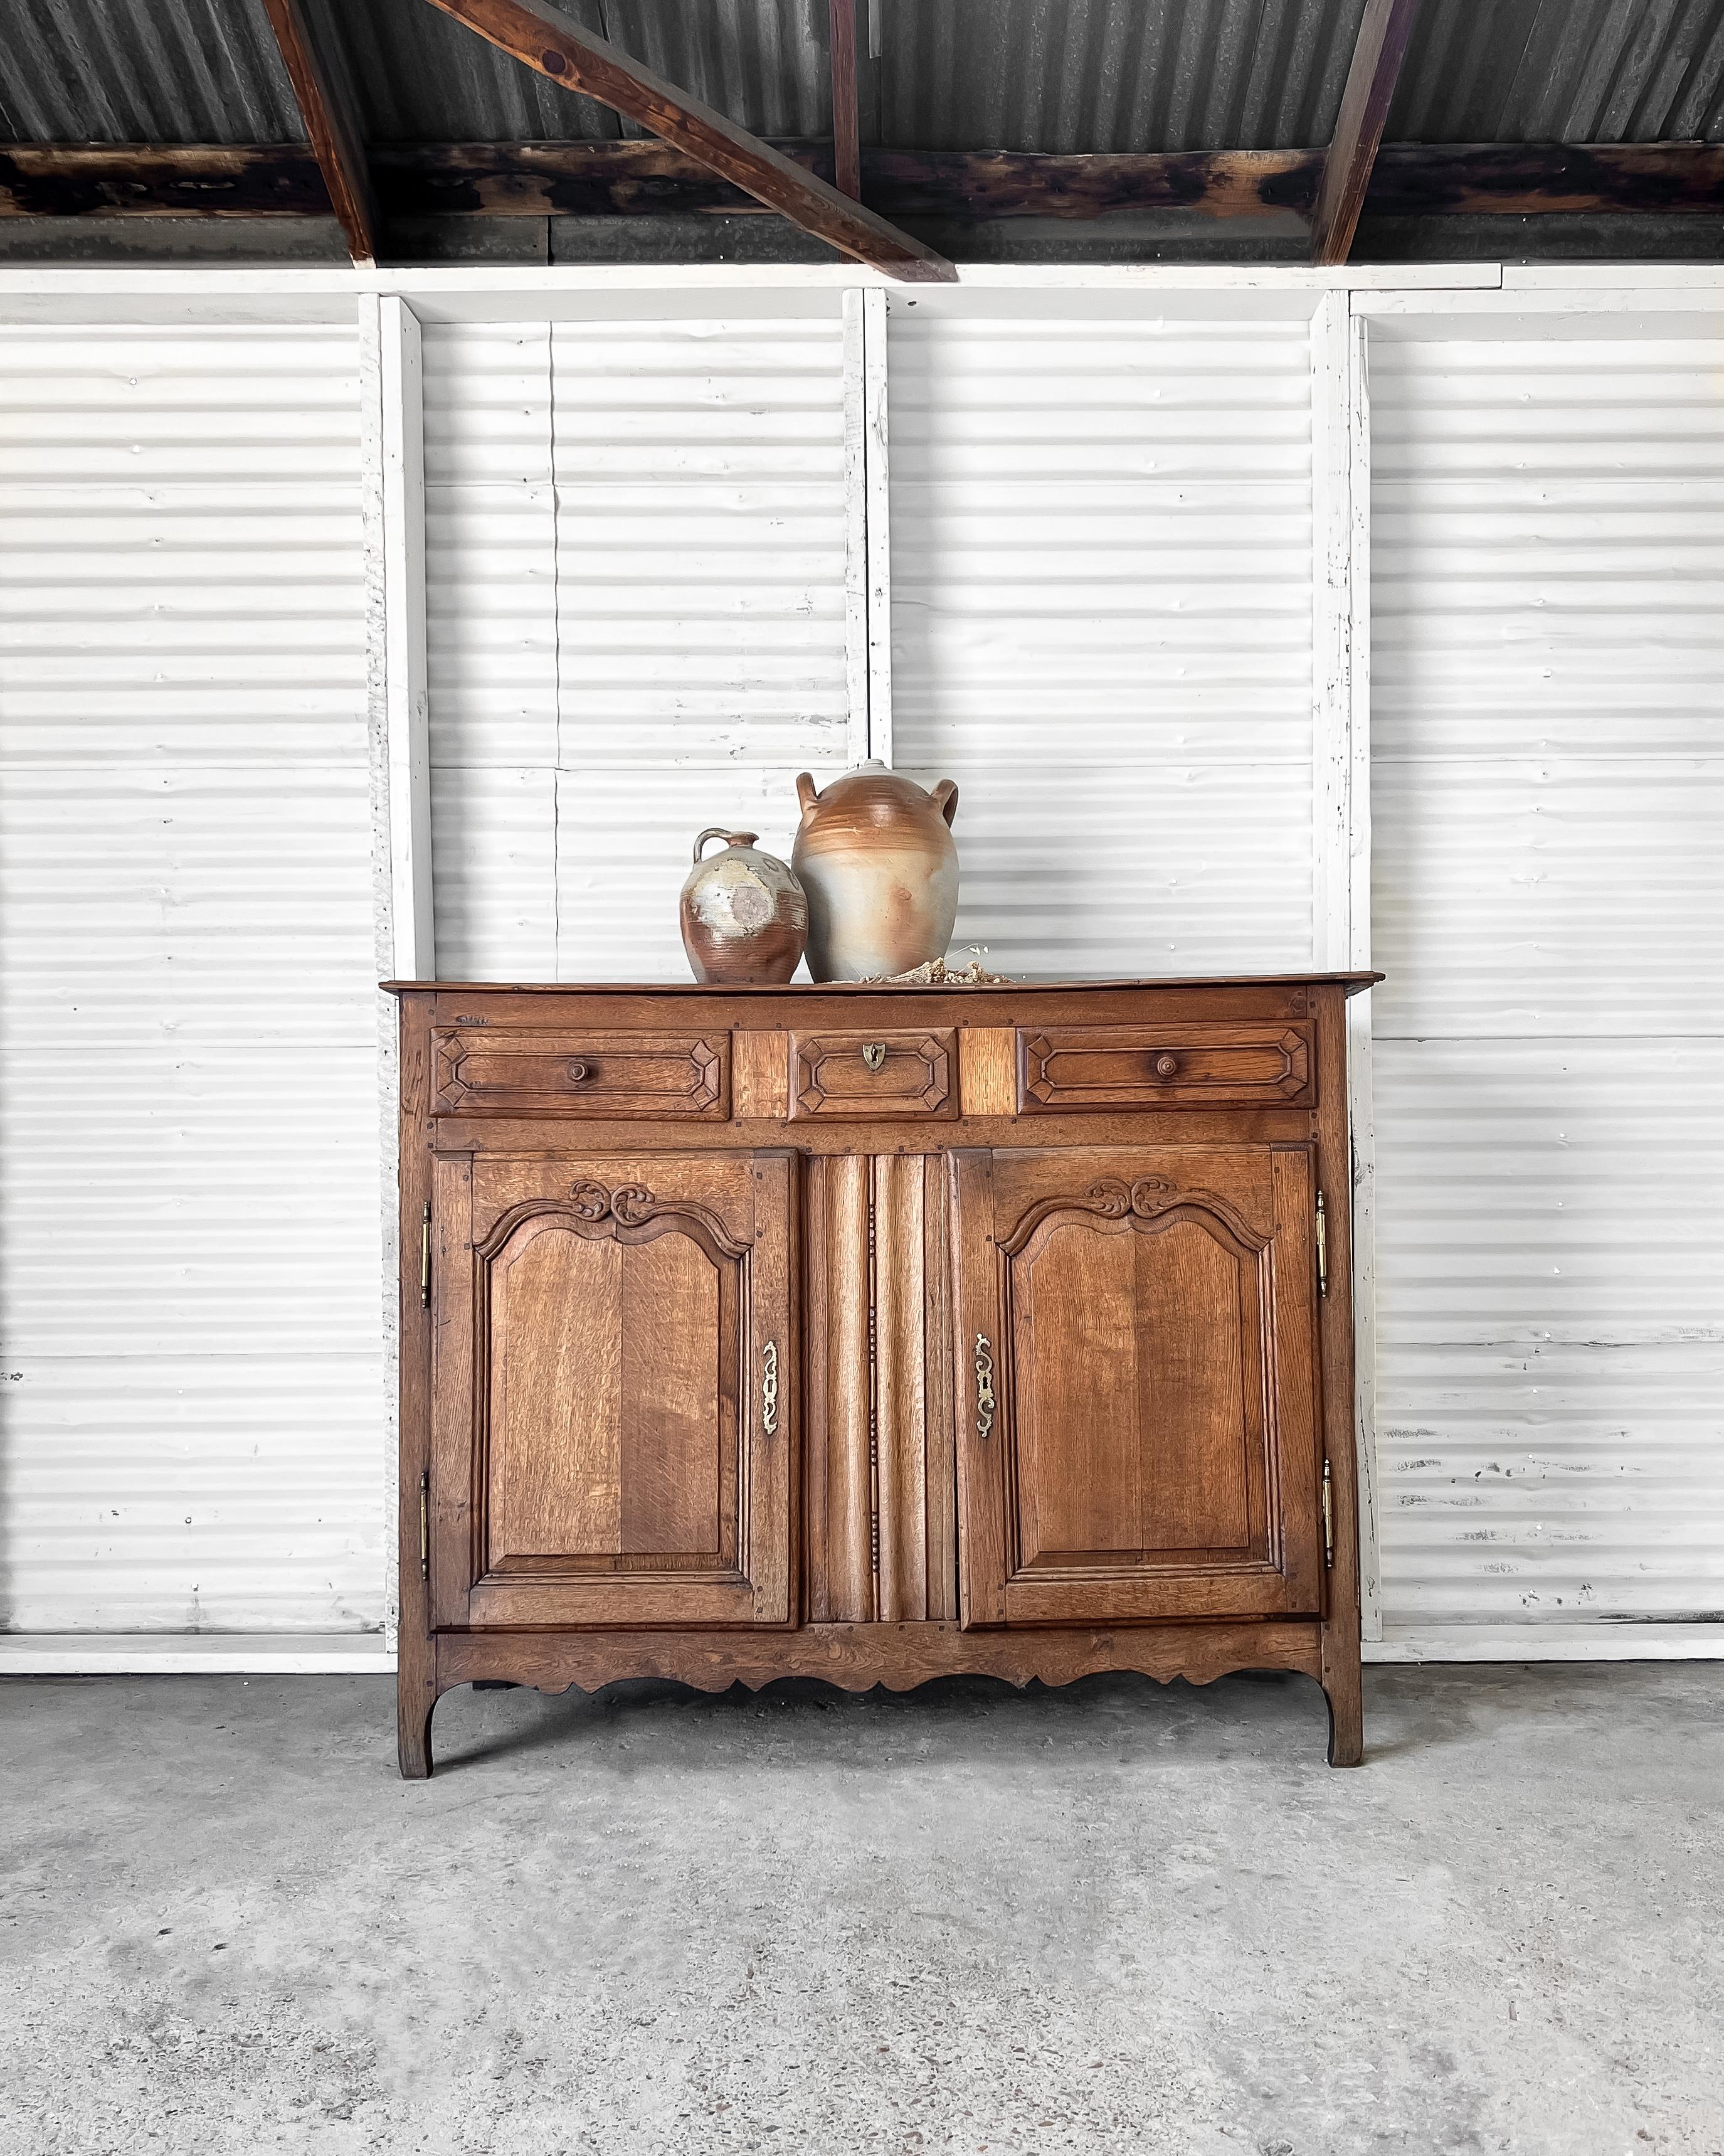 Antique French country sideboard dating to the mid-18th century has three drawers over two carved paneled doors that open to reveal a single shelf. Constructed from oak with a beautiful warm, aged patina, the sideboard features a planked top, a